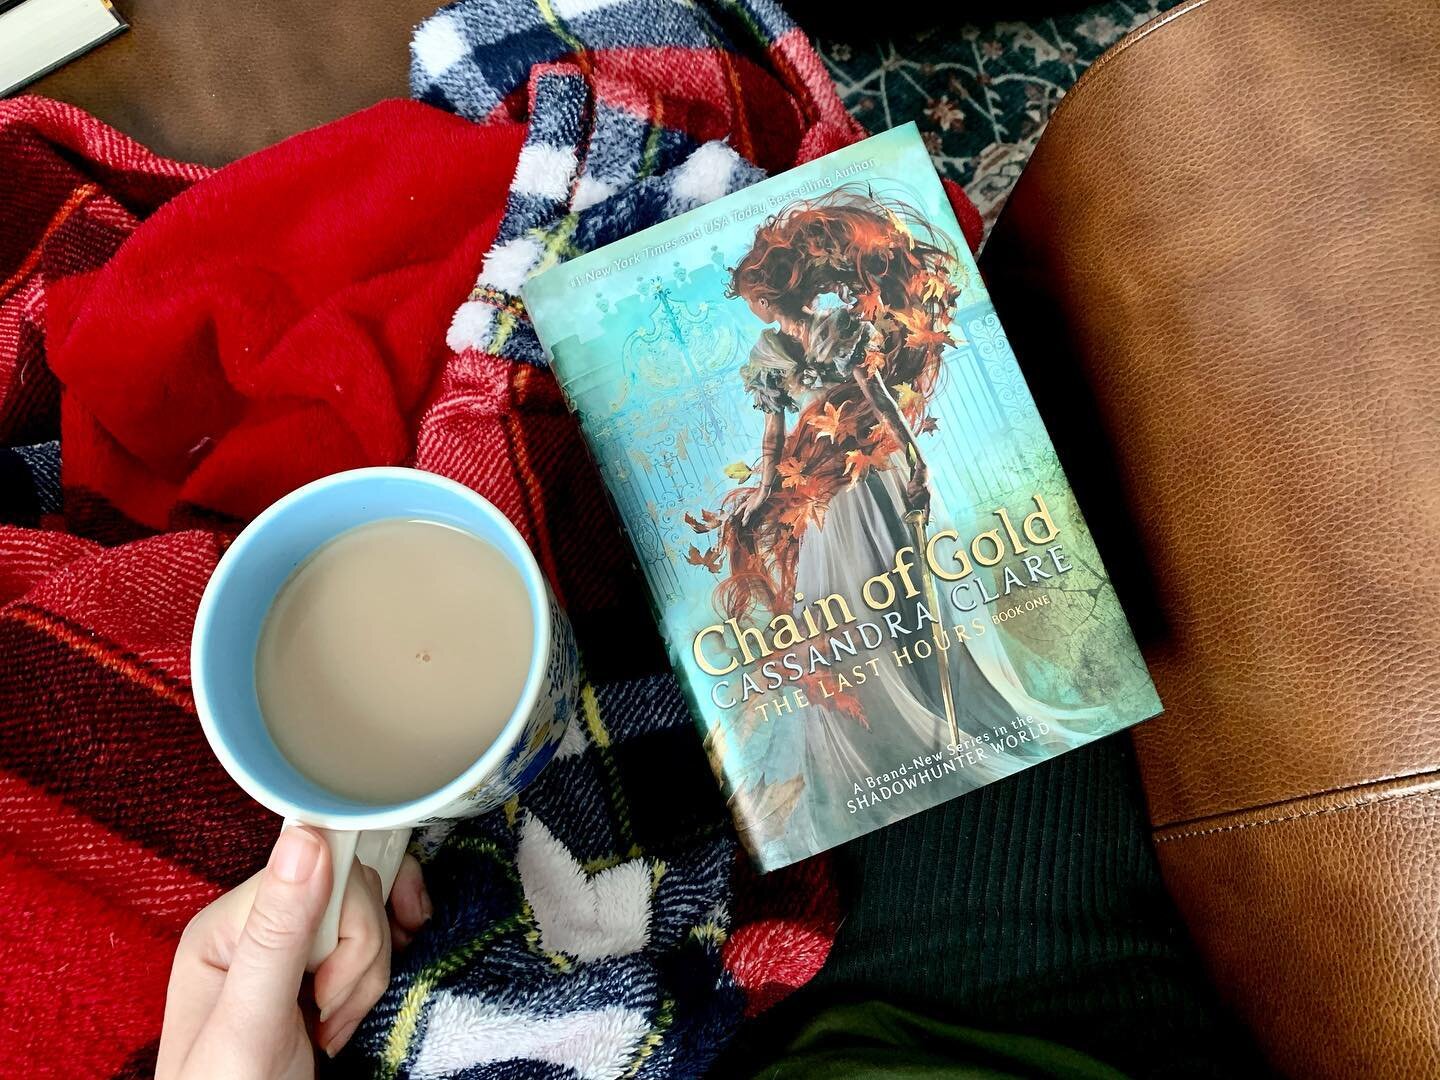 I know I posted about this book a few days ago, but I sat down with a blanket and a hot beverage and realized this was the most bookstagram thing I could have done. So photo documentation seemed appropriate. 

I&rsquo;m excited to get my copy of Chai